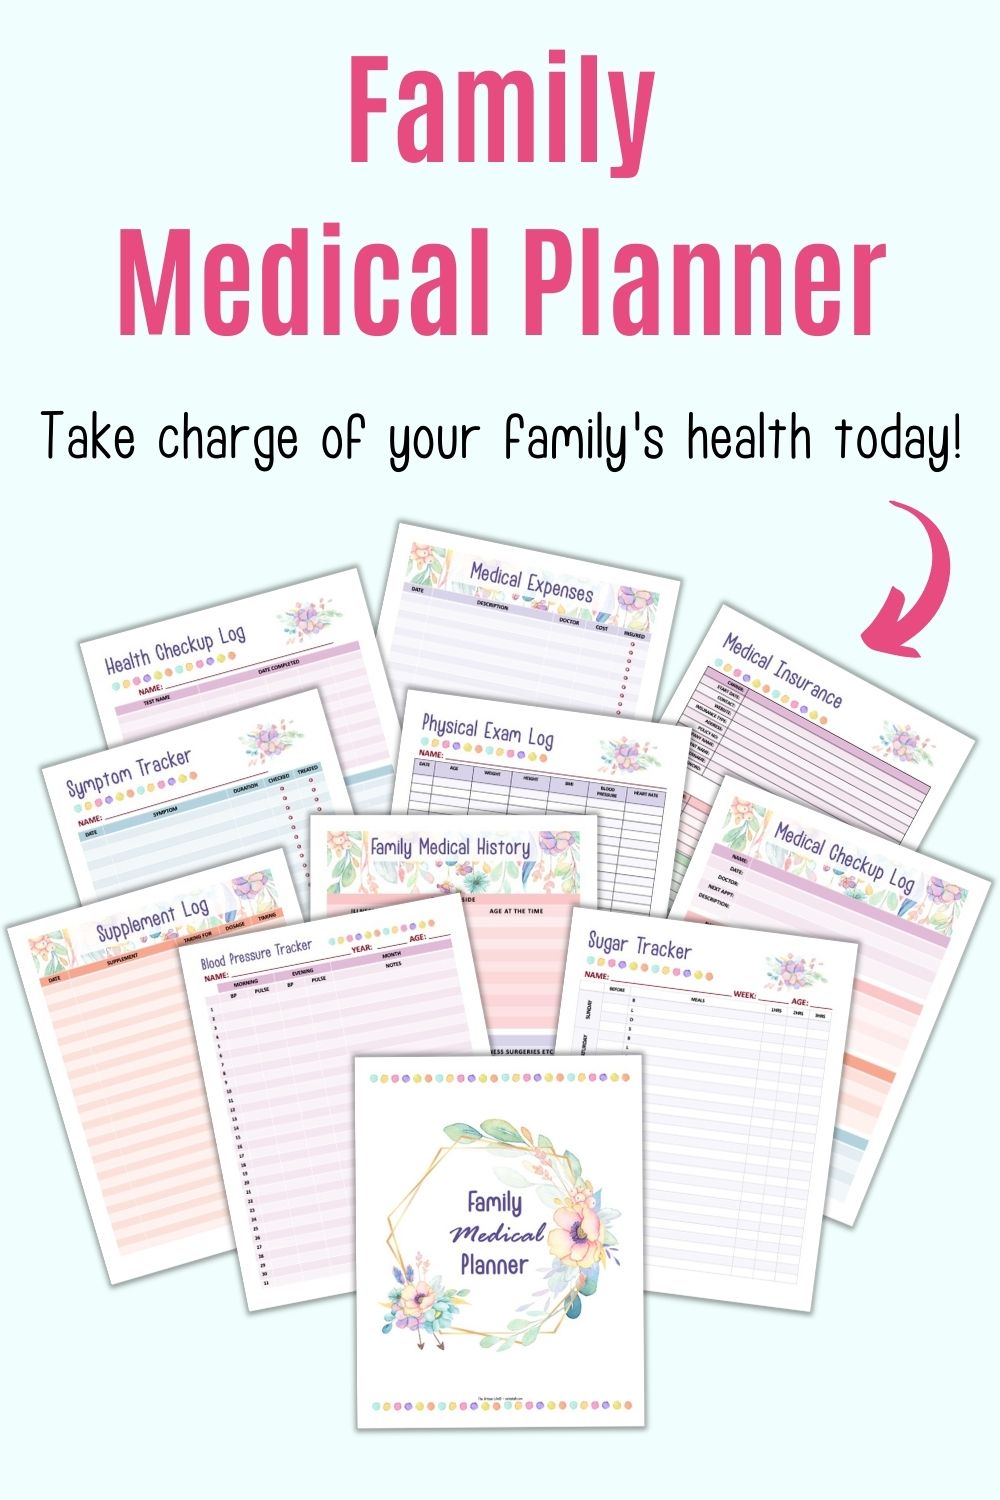 Text "Family medical planner - take charge of your family's healthy today!" above a preview of 11 pages of medical planner printable with a floral pastel theme